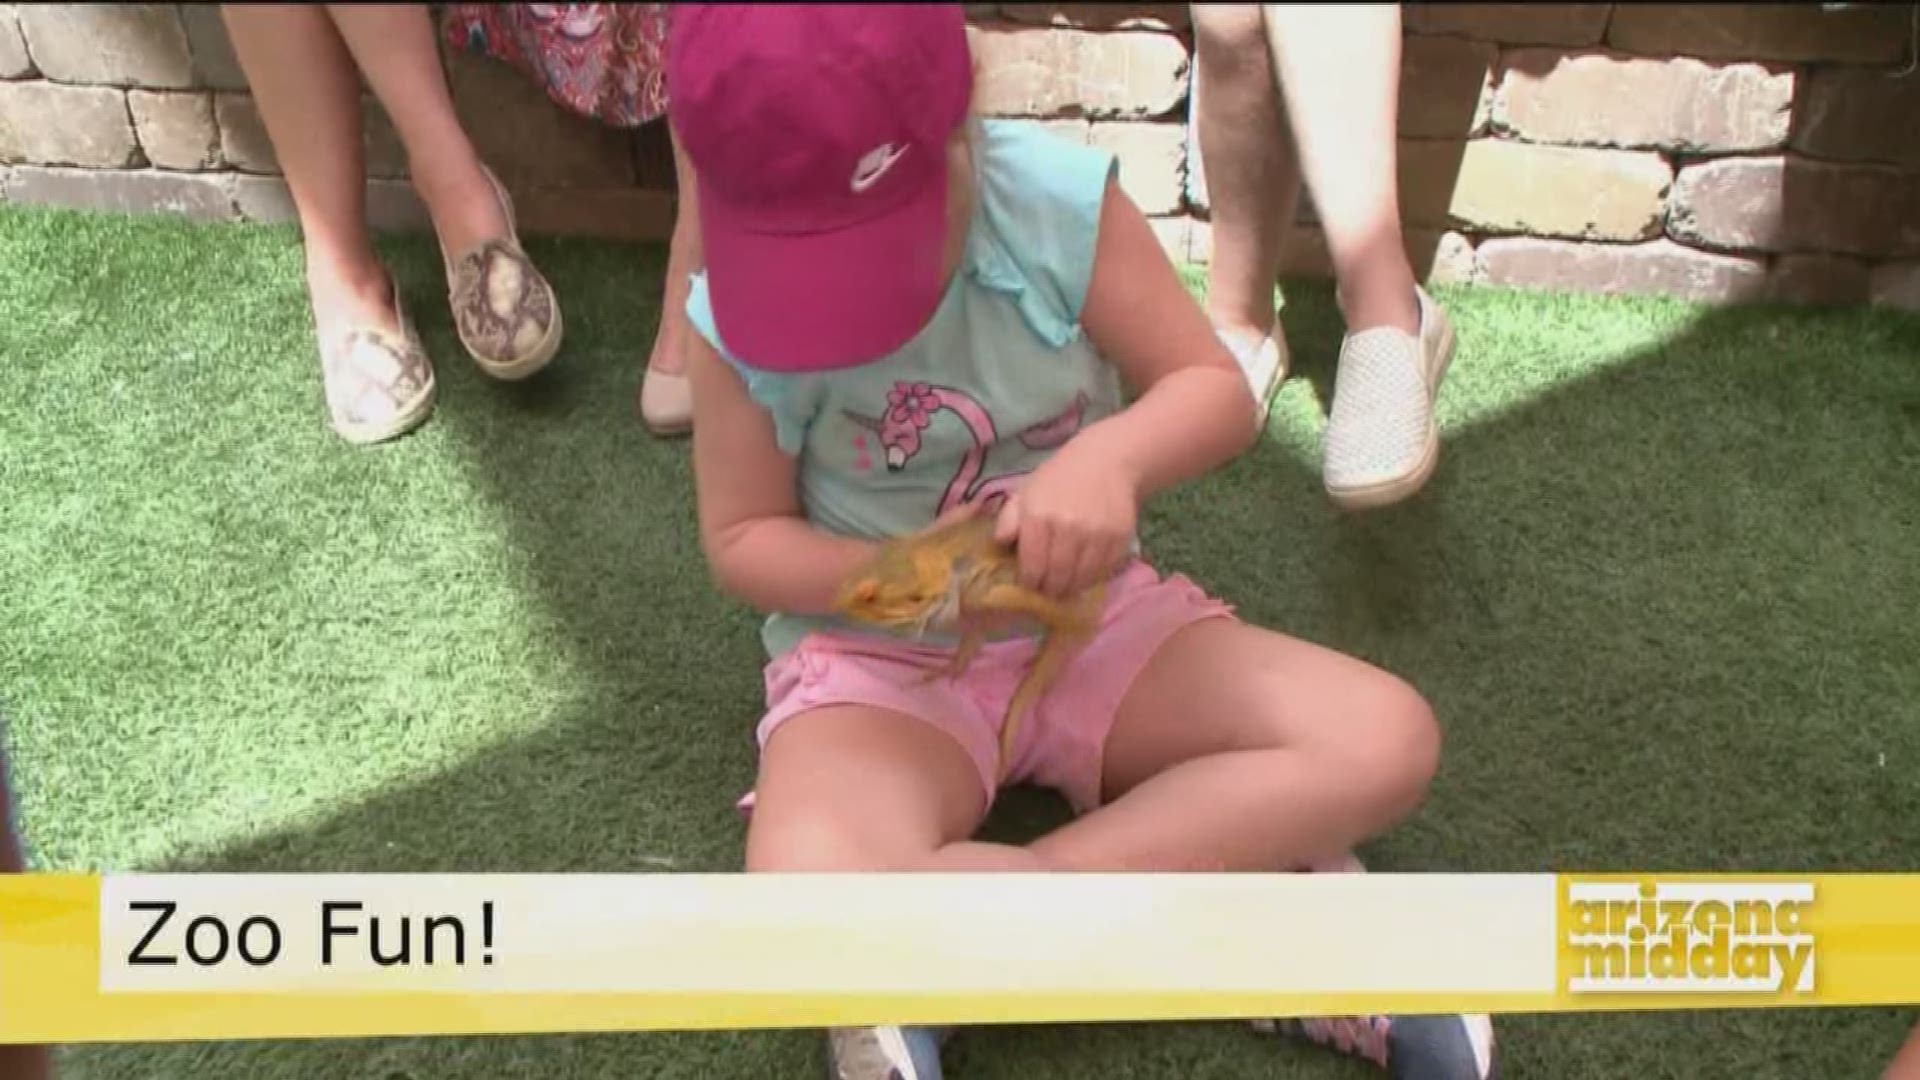 Kristy Morcom from Wildlife World Zoo shows us the cutest reptile critters, from snakes to bearded dragons and gives us the scoop on Summer Camp for Kids